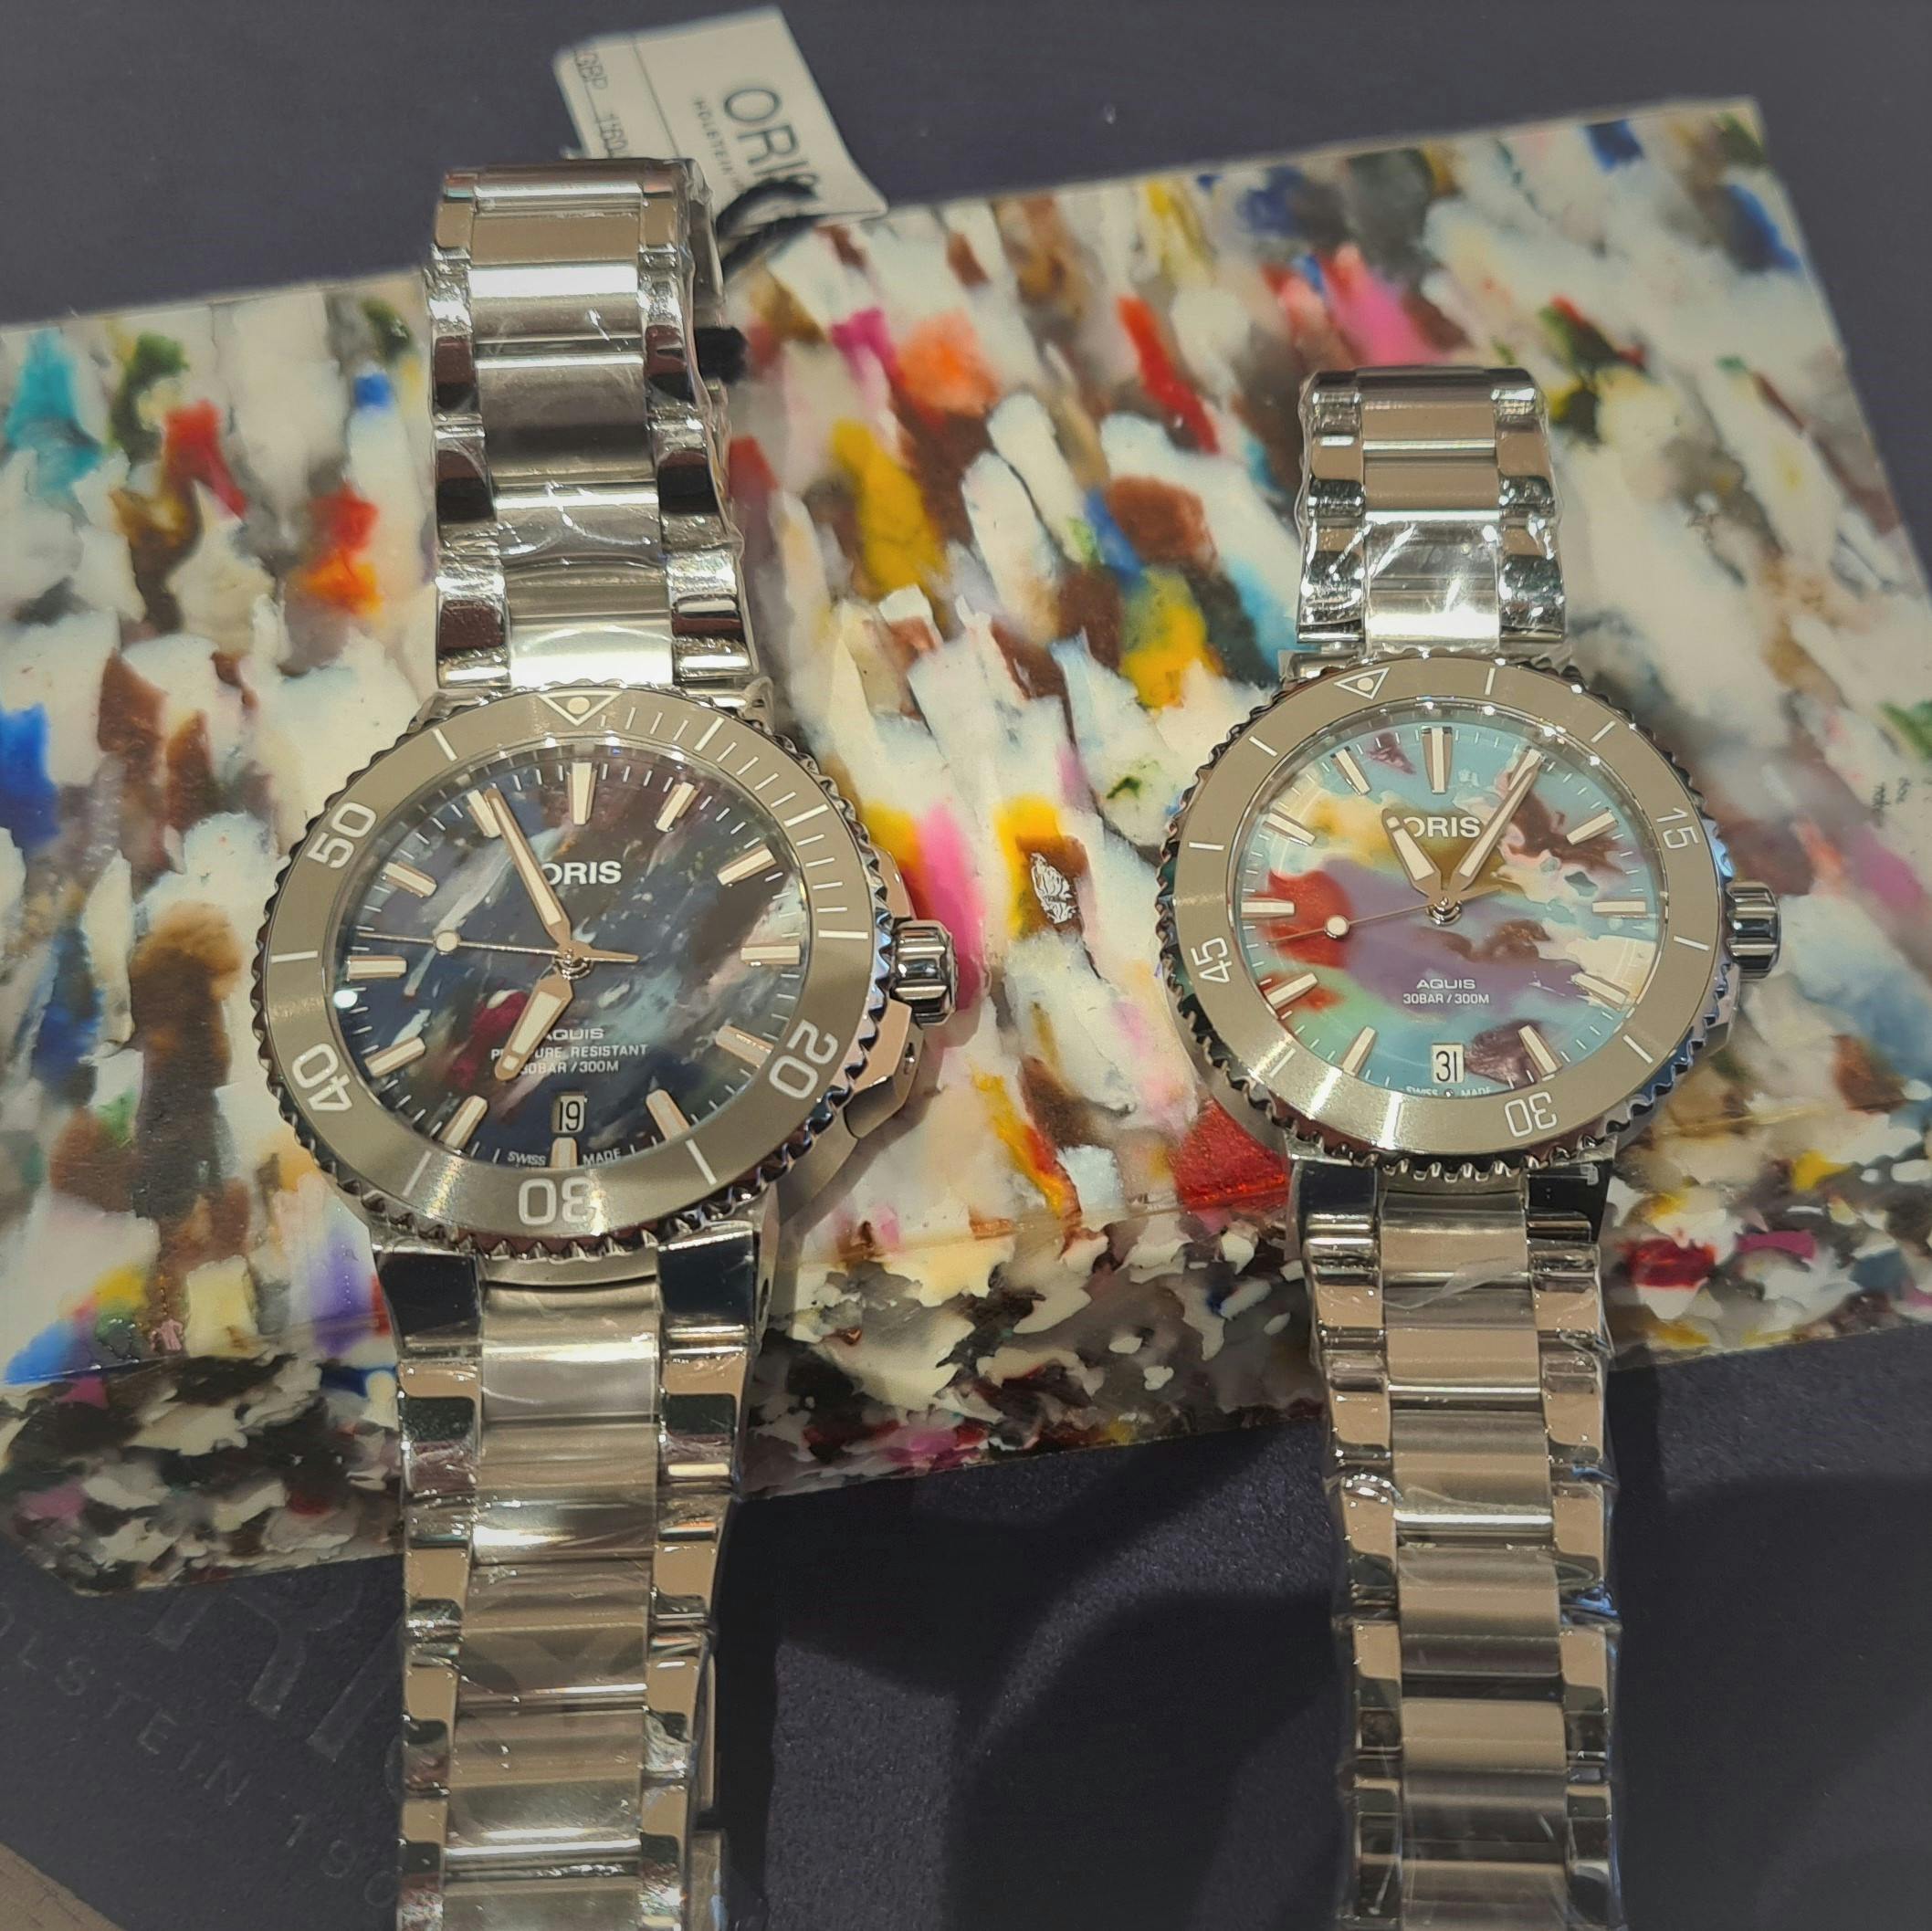 A Pair or Oris Aquis Upcycle watches on a block of mottle coloured plastic, both have steel cases and bracelets and inique multi coloured mottled plastic dials.